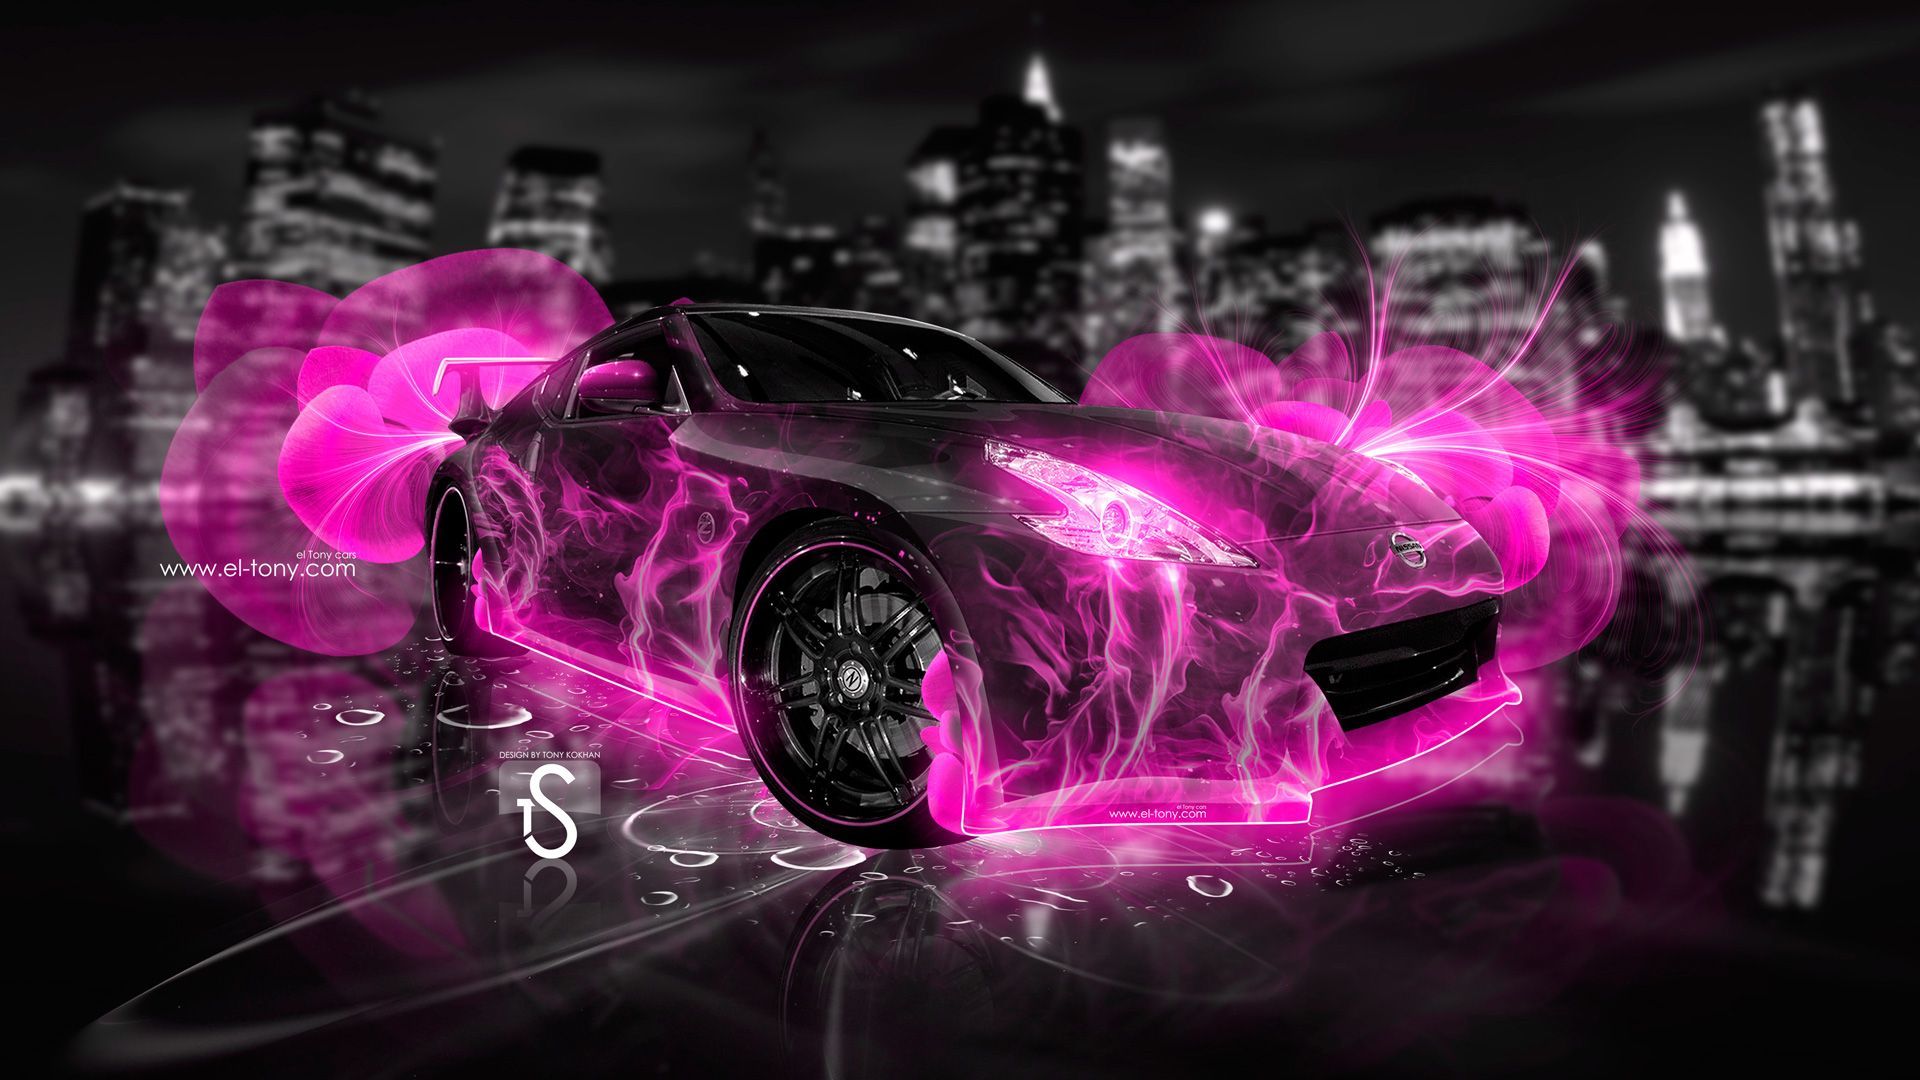 Neon Supercars Wallpaper Free Neon Supercars Background